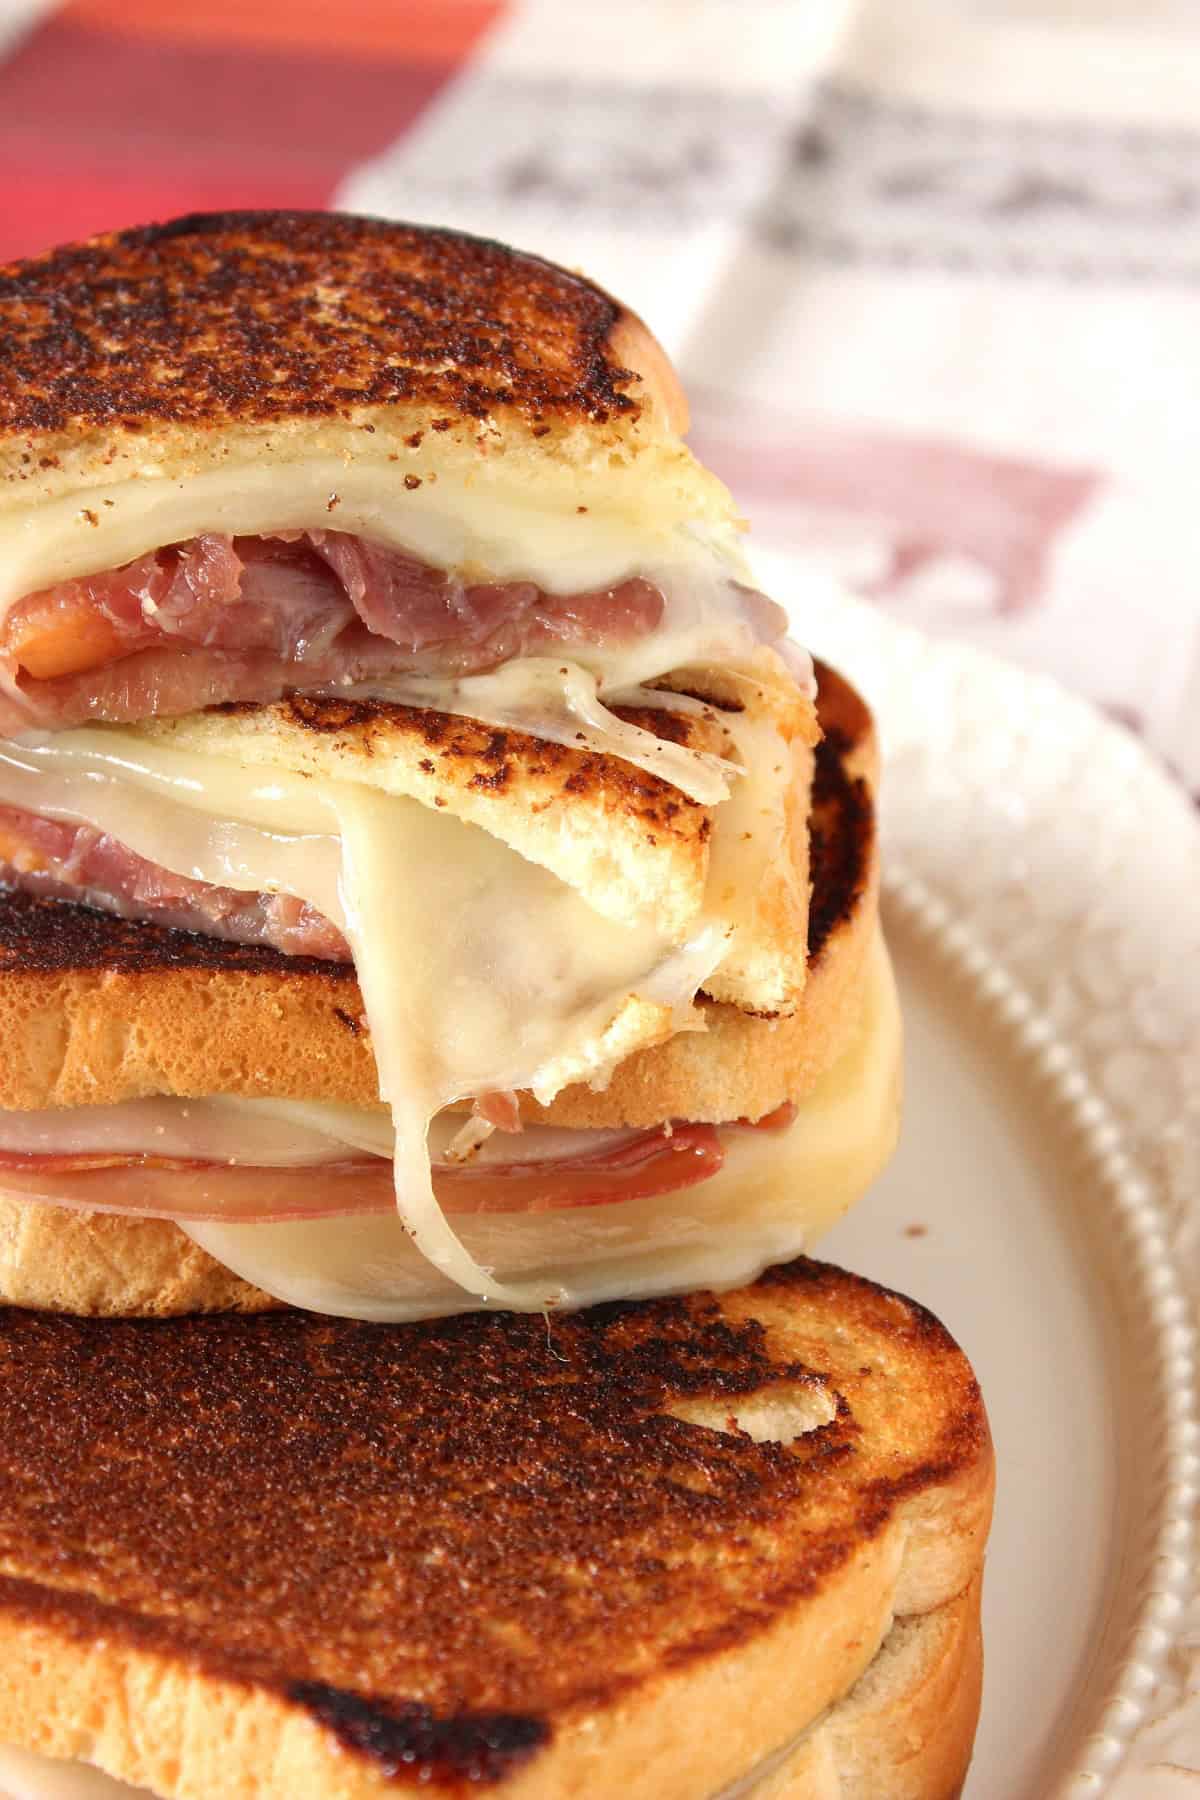 Delicious looking grilled cheese sandwiches with provolone, melon, and prosciutto on a pretty plate.